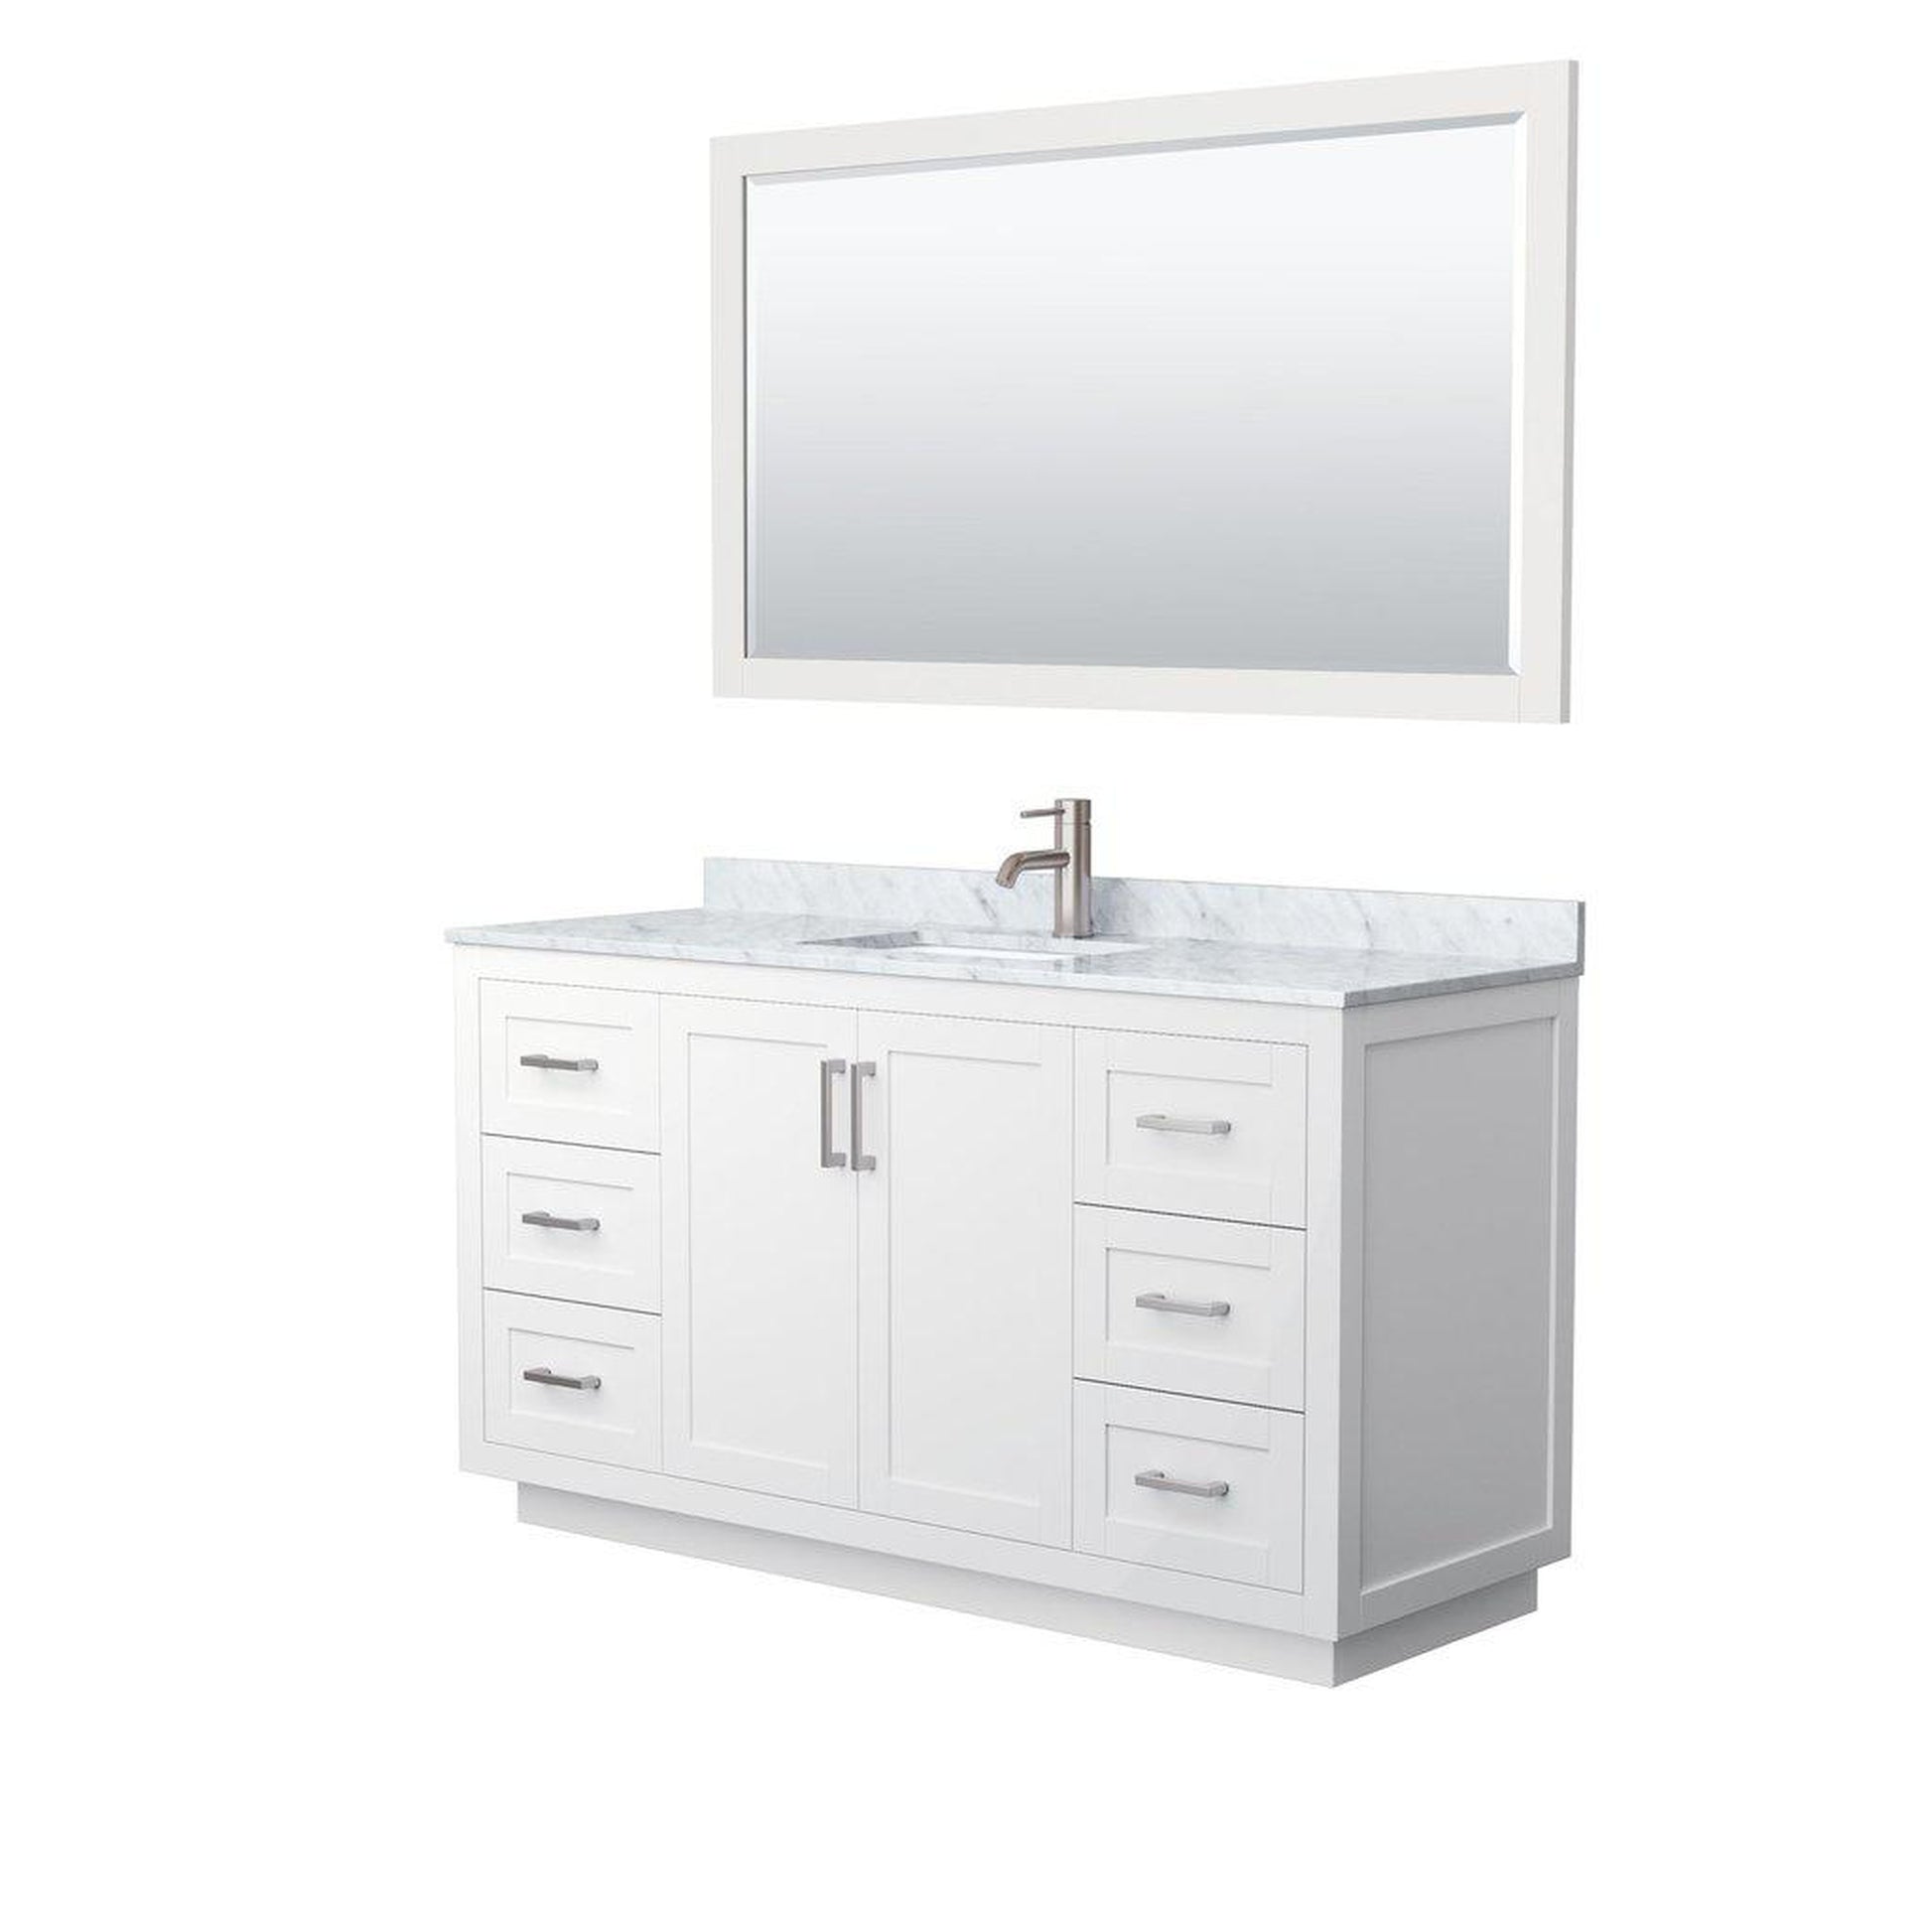 Wyndham Collection Miranda 60" Single Bathroom White Vanity Set With White Carrara Marble Countertop, Undermount Square Sink, 58" Mirror And Brushed Nickel Trim